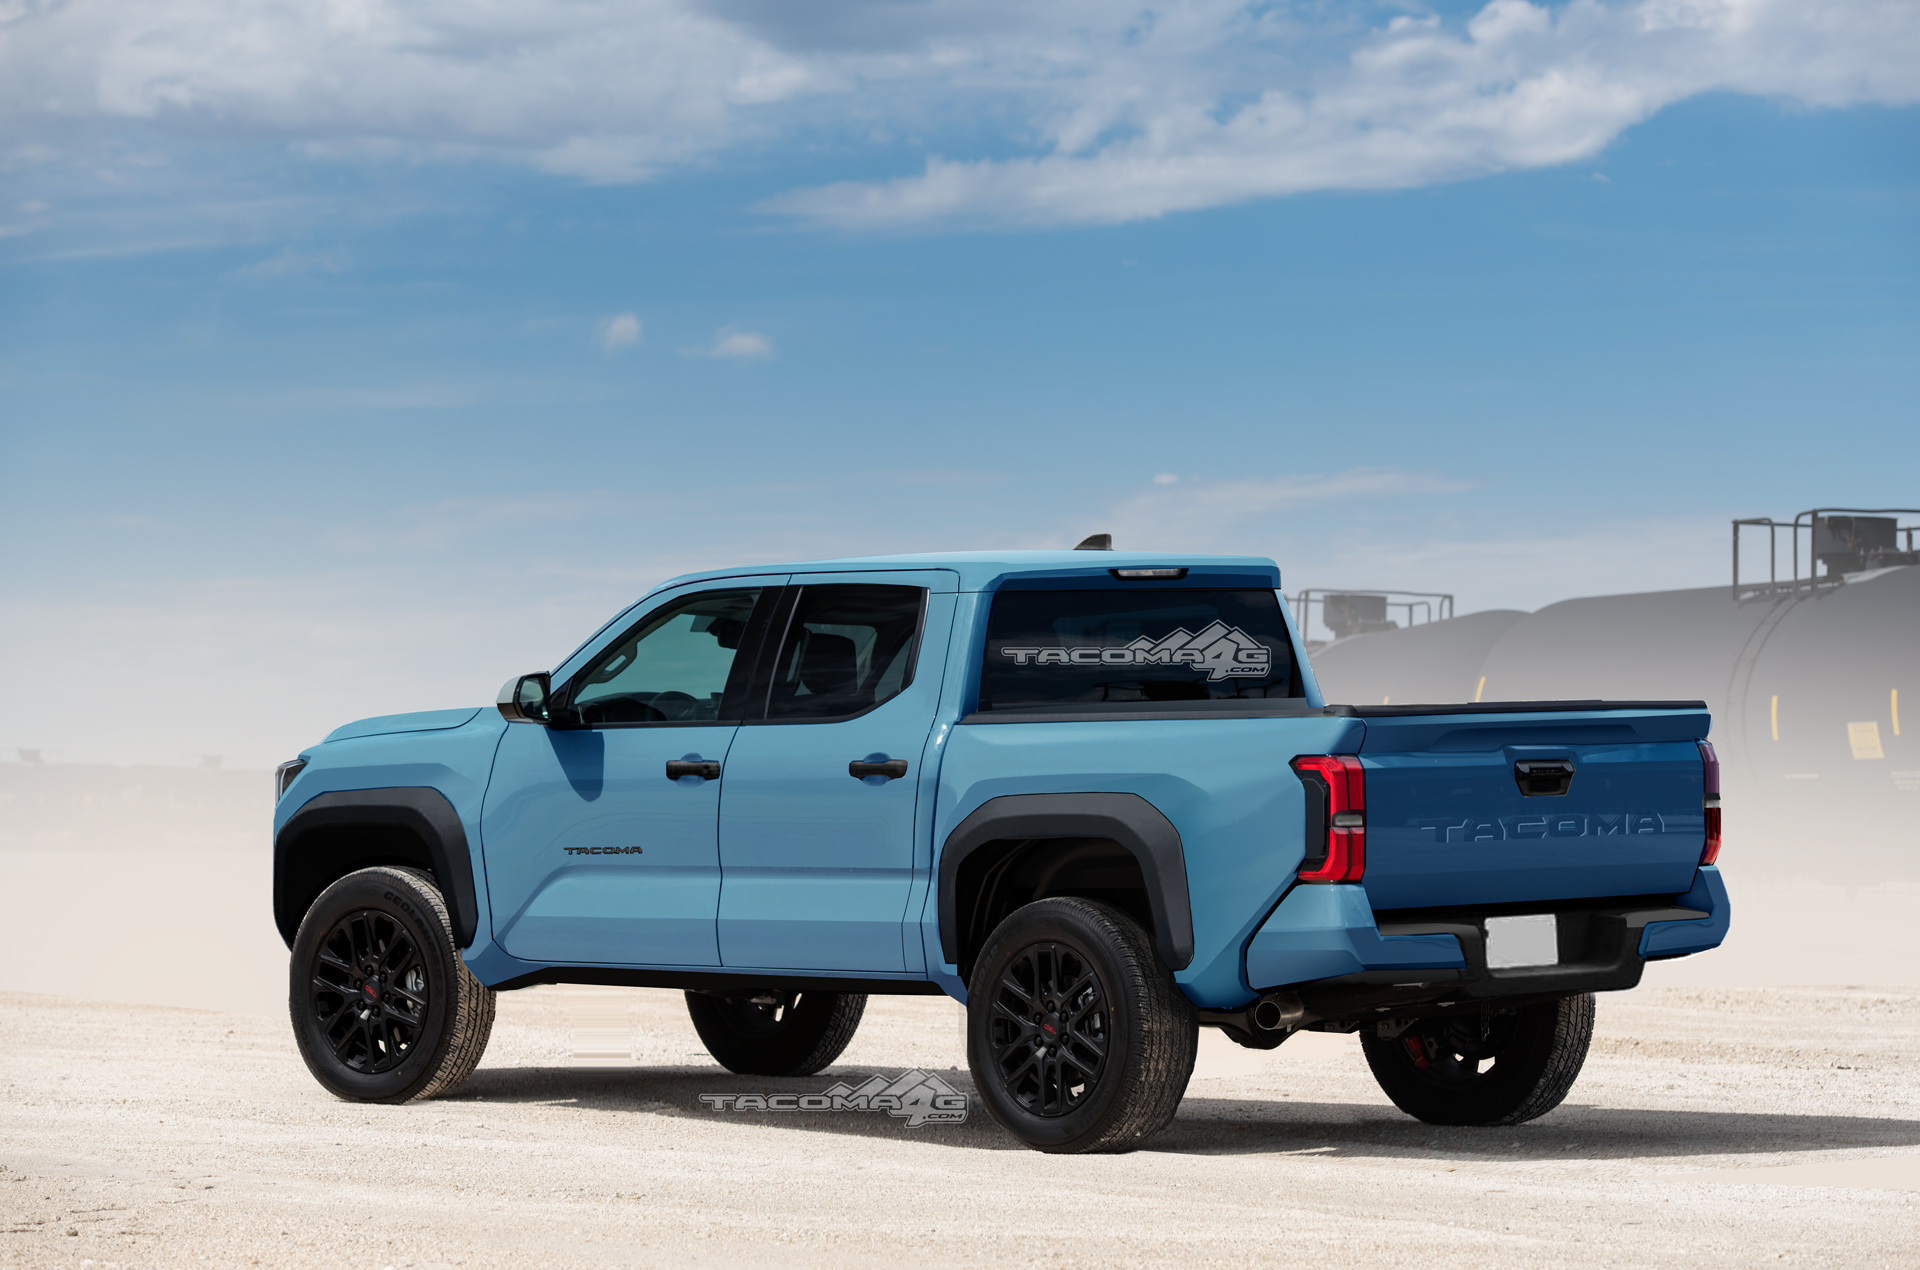 2024 Tacoma Our 2024 Toyota Tacoma TRD PRO Preview Renderings! Tacoma-2023-rear-blue